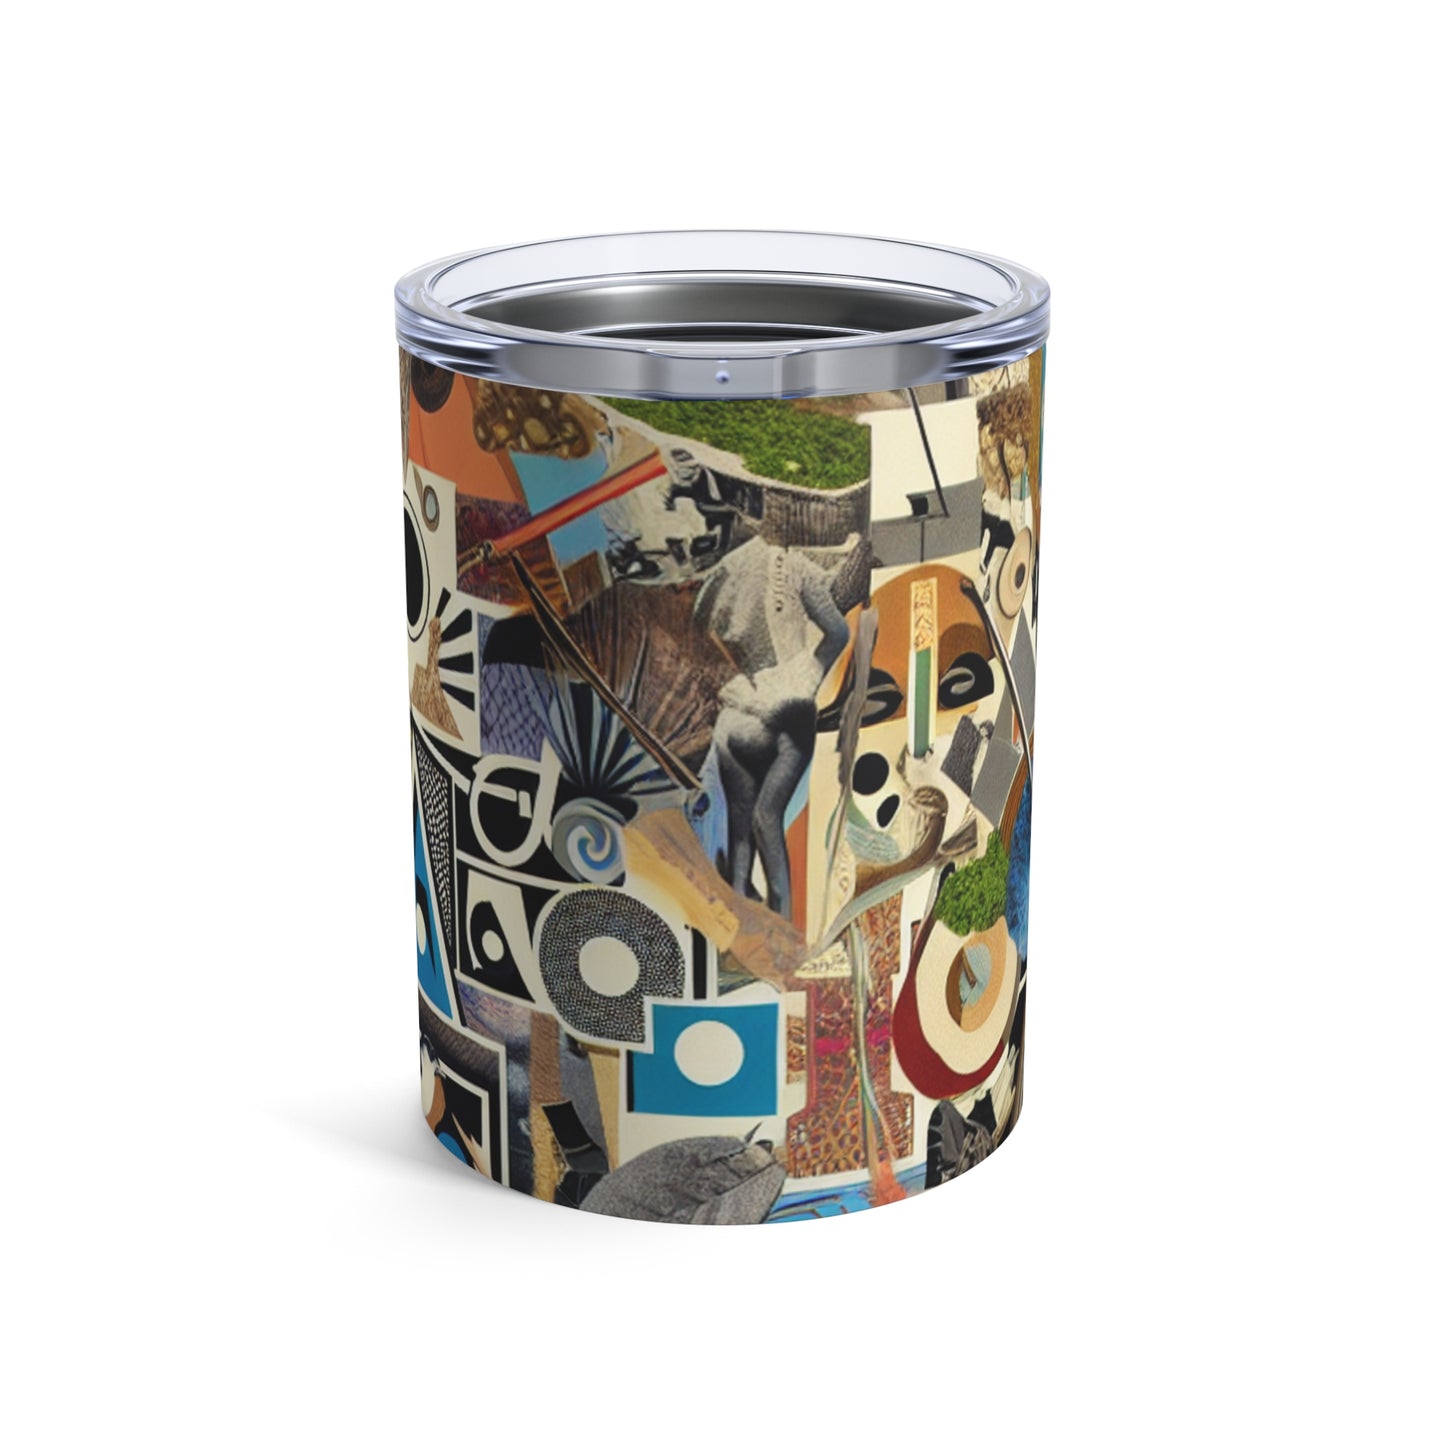 "Mysterious Poetry of the Natural World" - The Alien Tumbler 10oz Dadaism Style